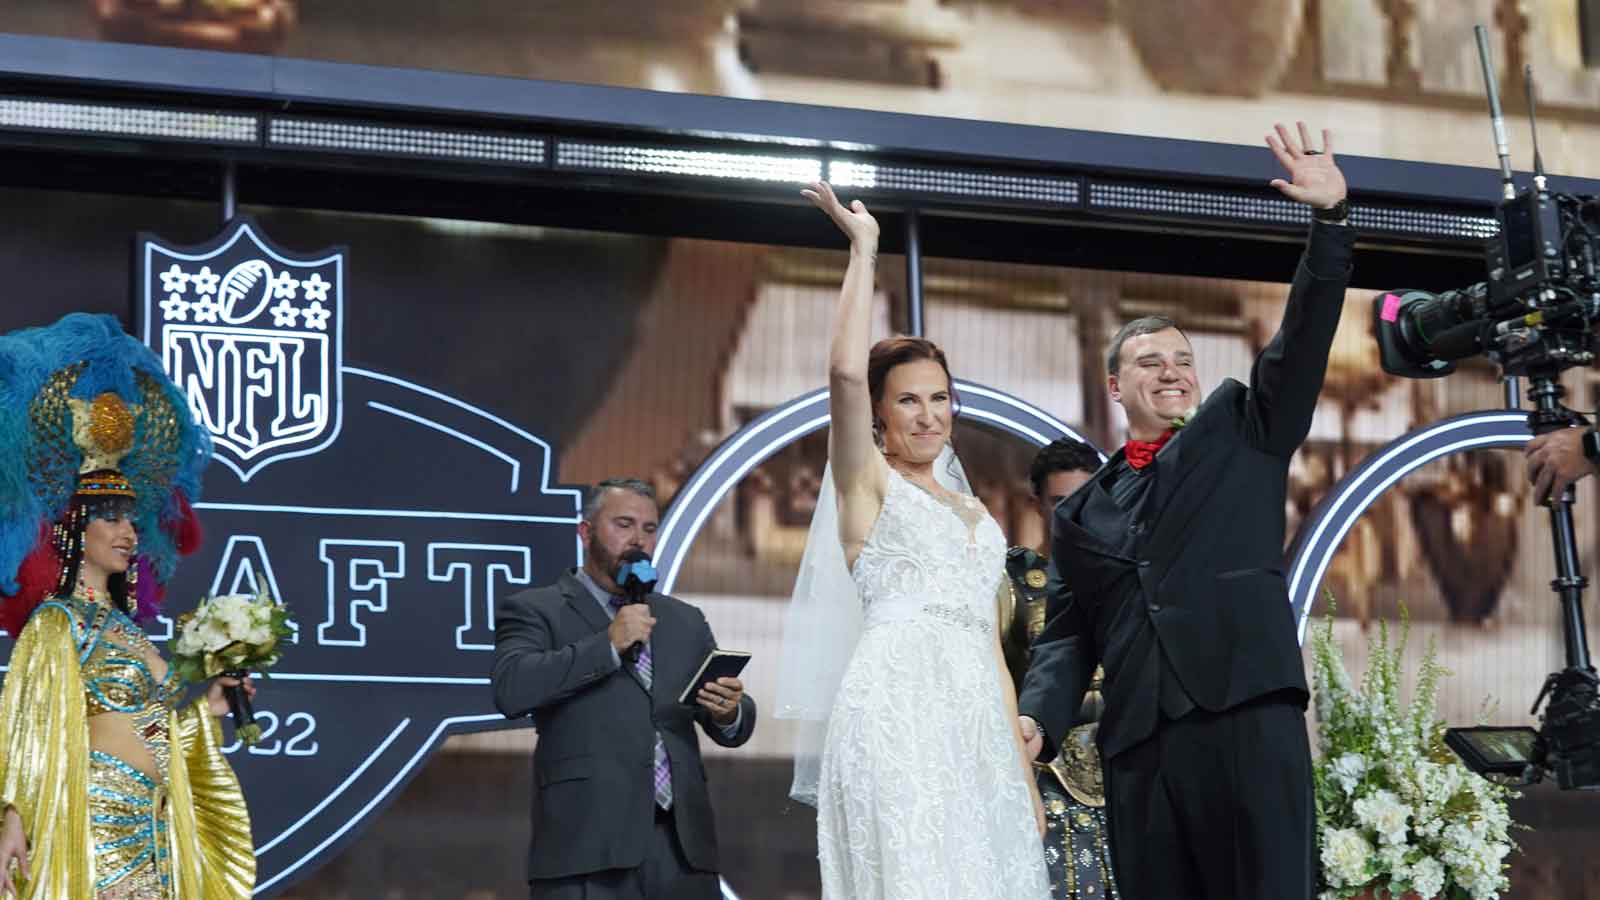 Couple Gets Married on Stage During 2022 NFL Draft